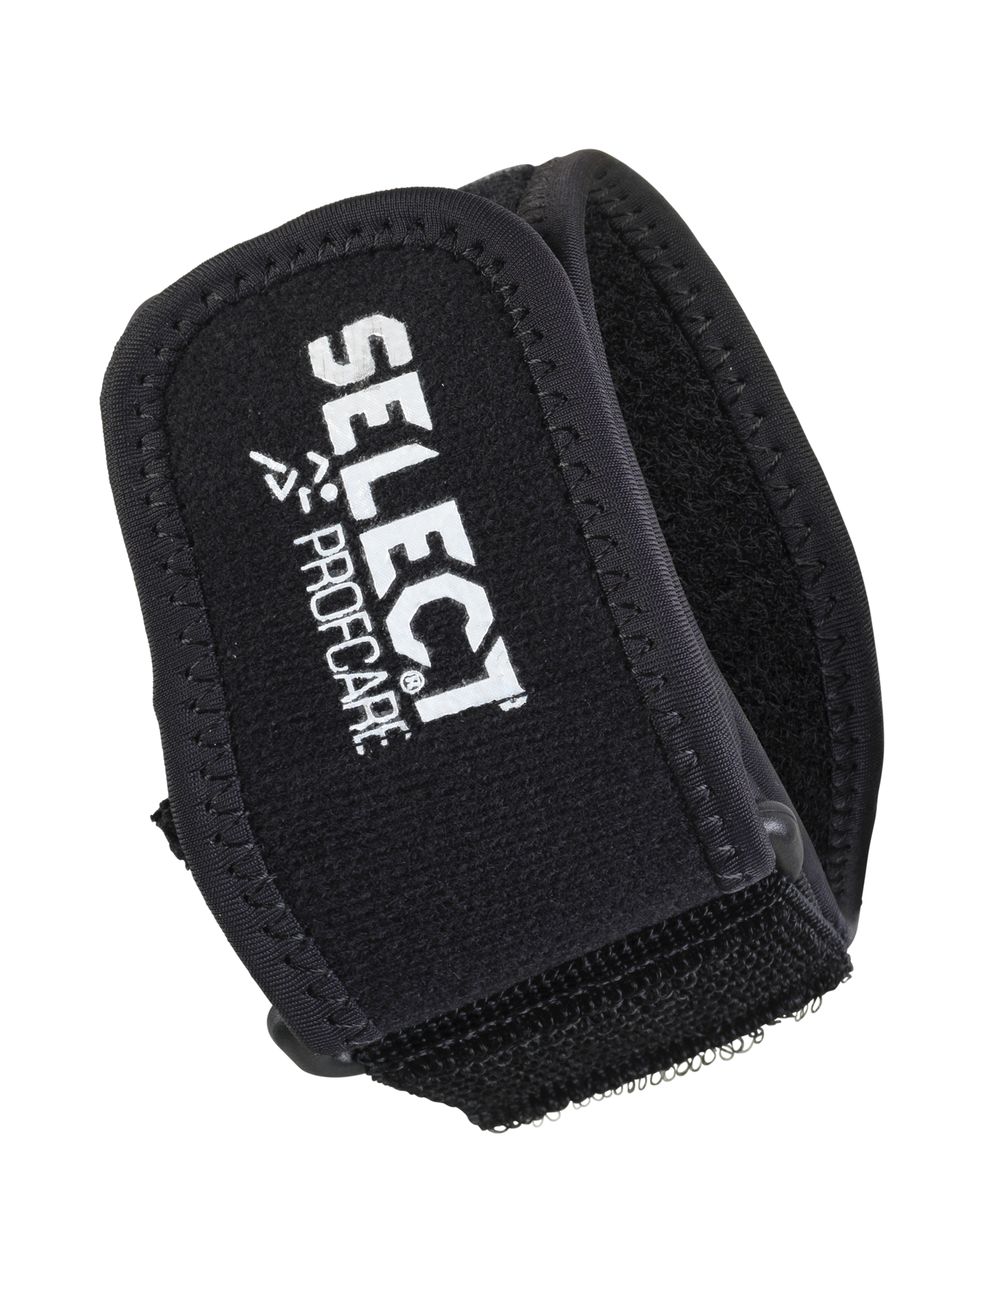 SELECT TENNIS - GOLF ELBOW SUPPORT